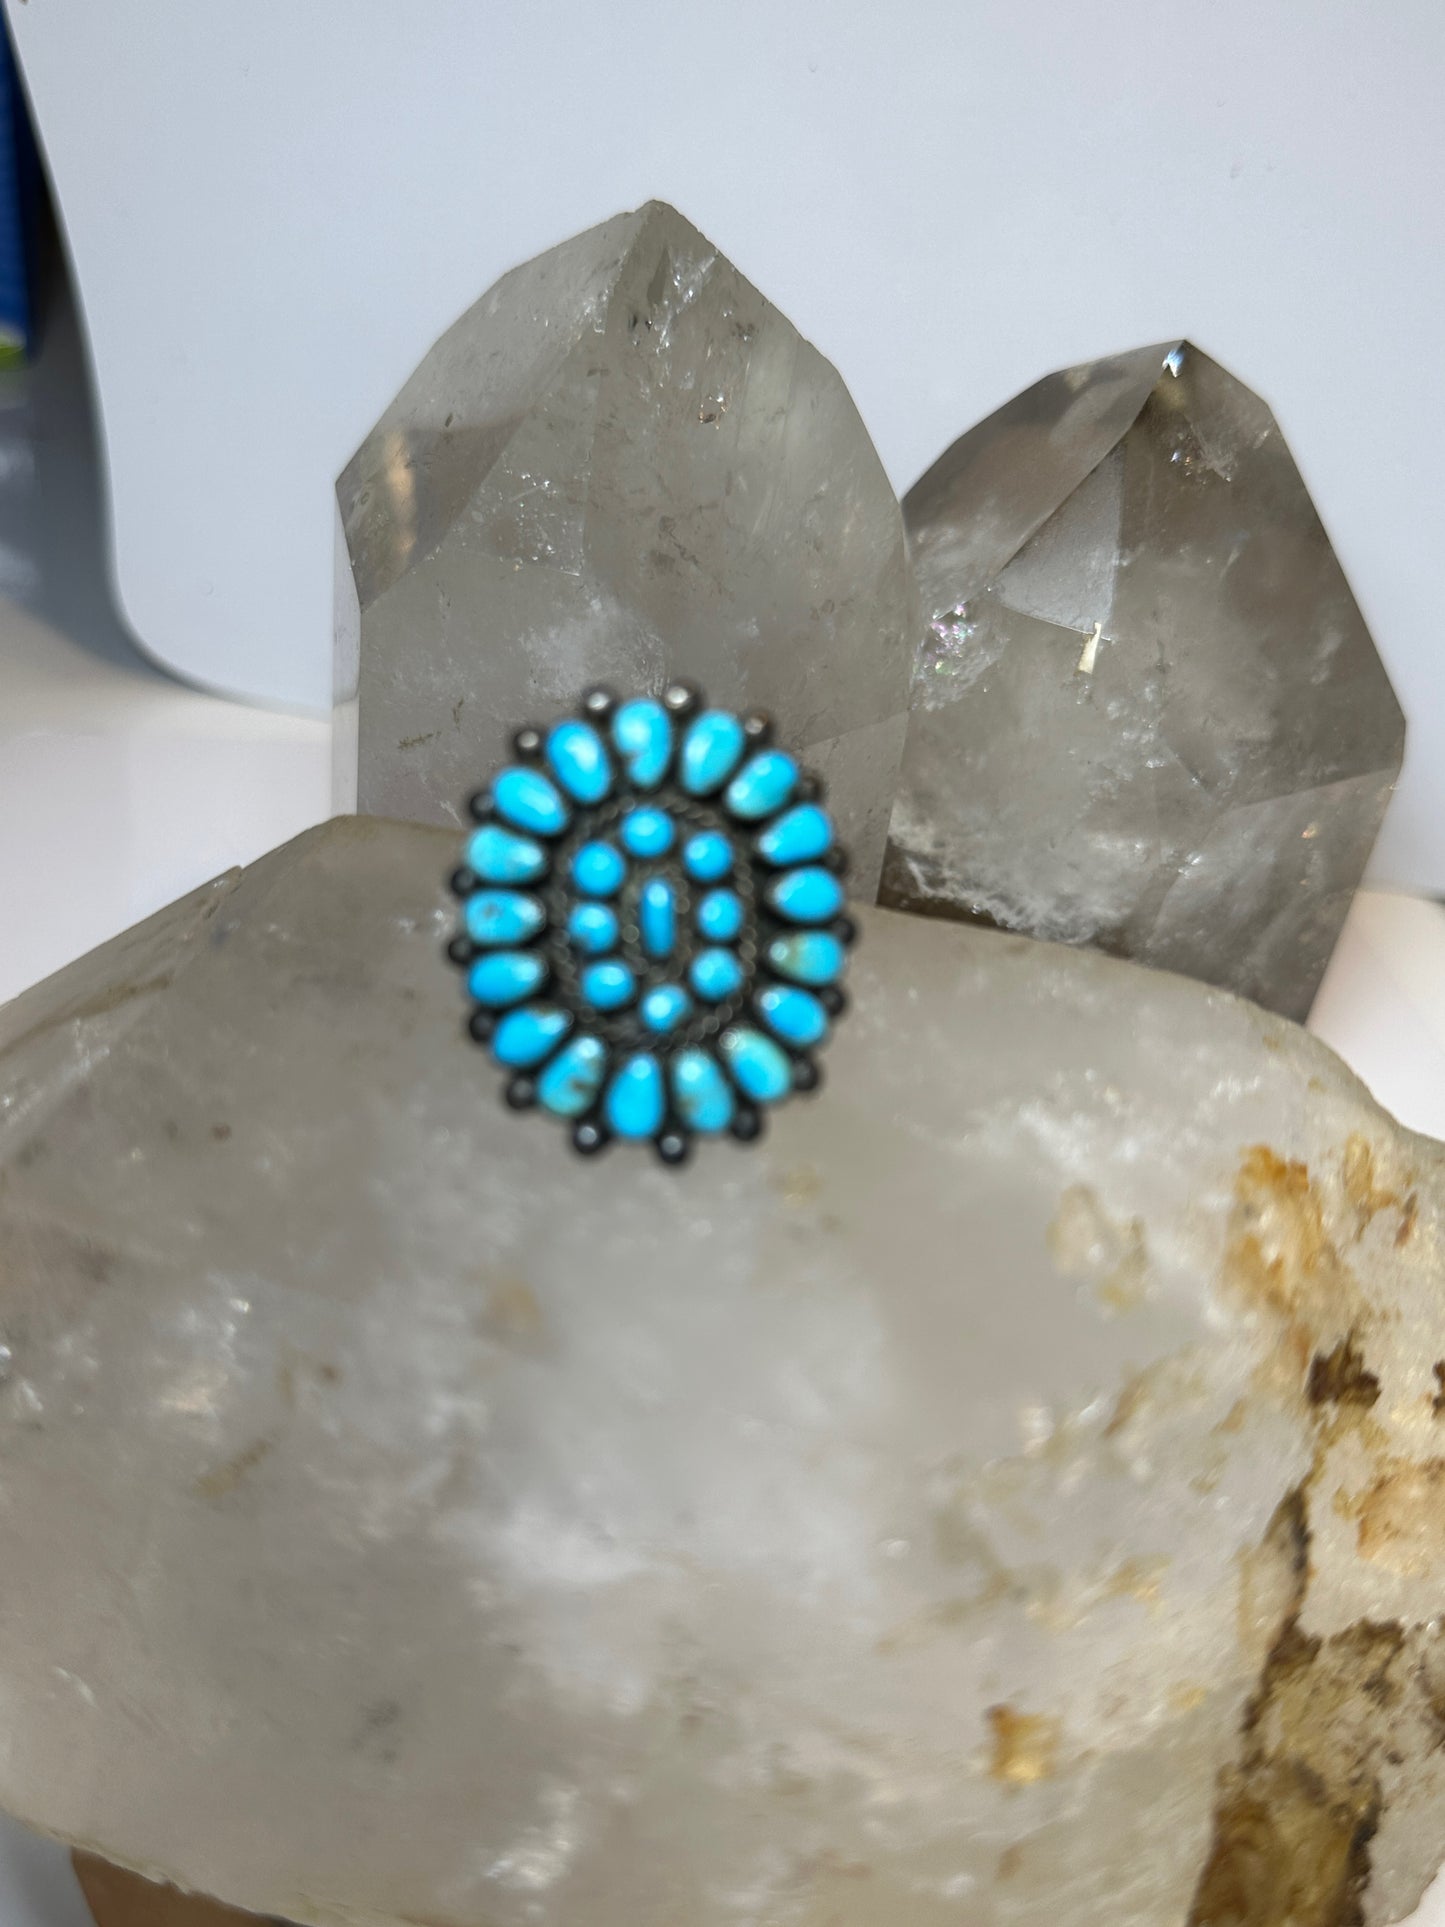 Turquoise ring size 7.50 Zuni  sterling silver women